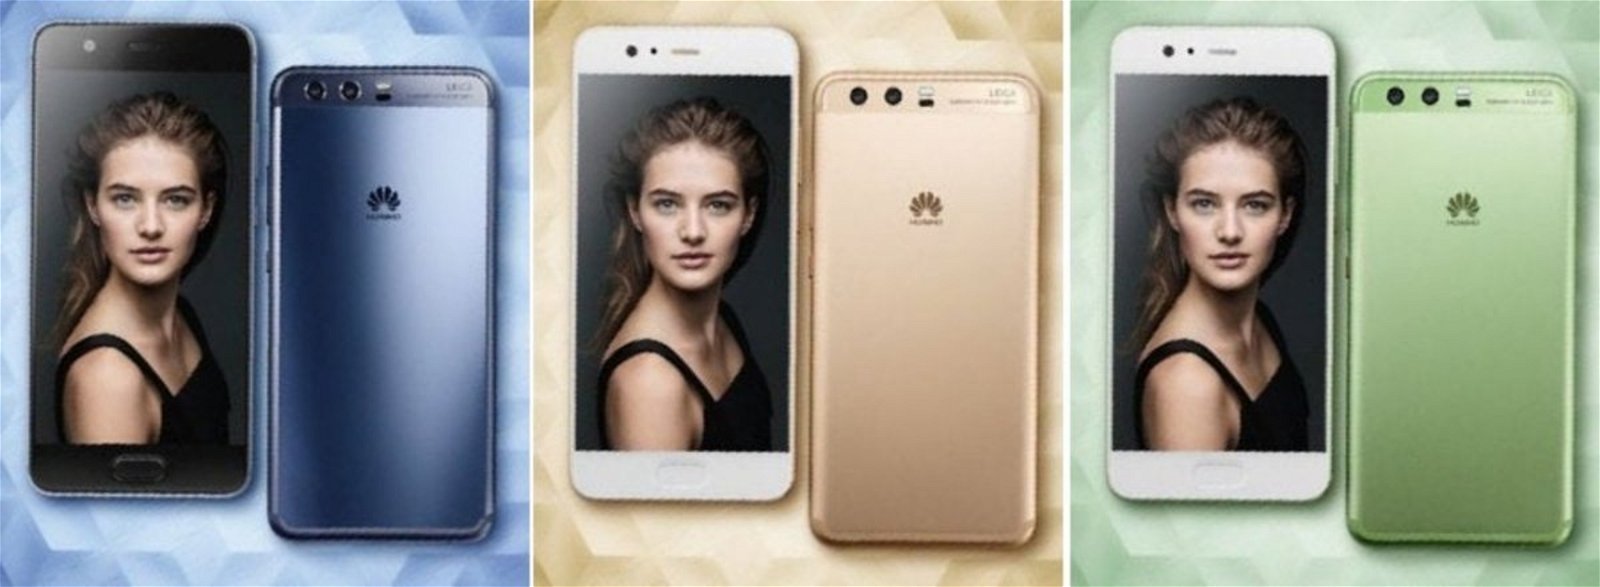 Huawei P10 colores